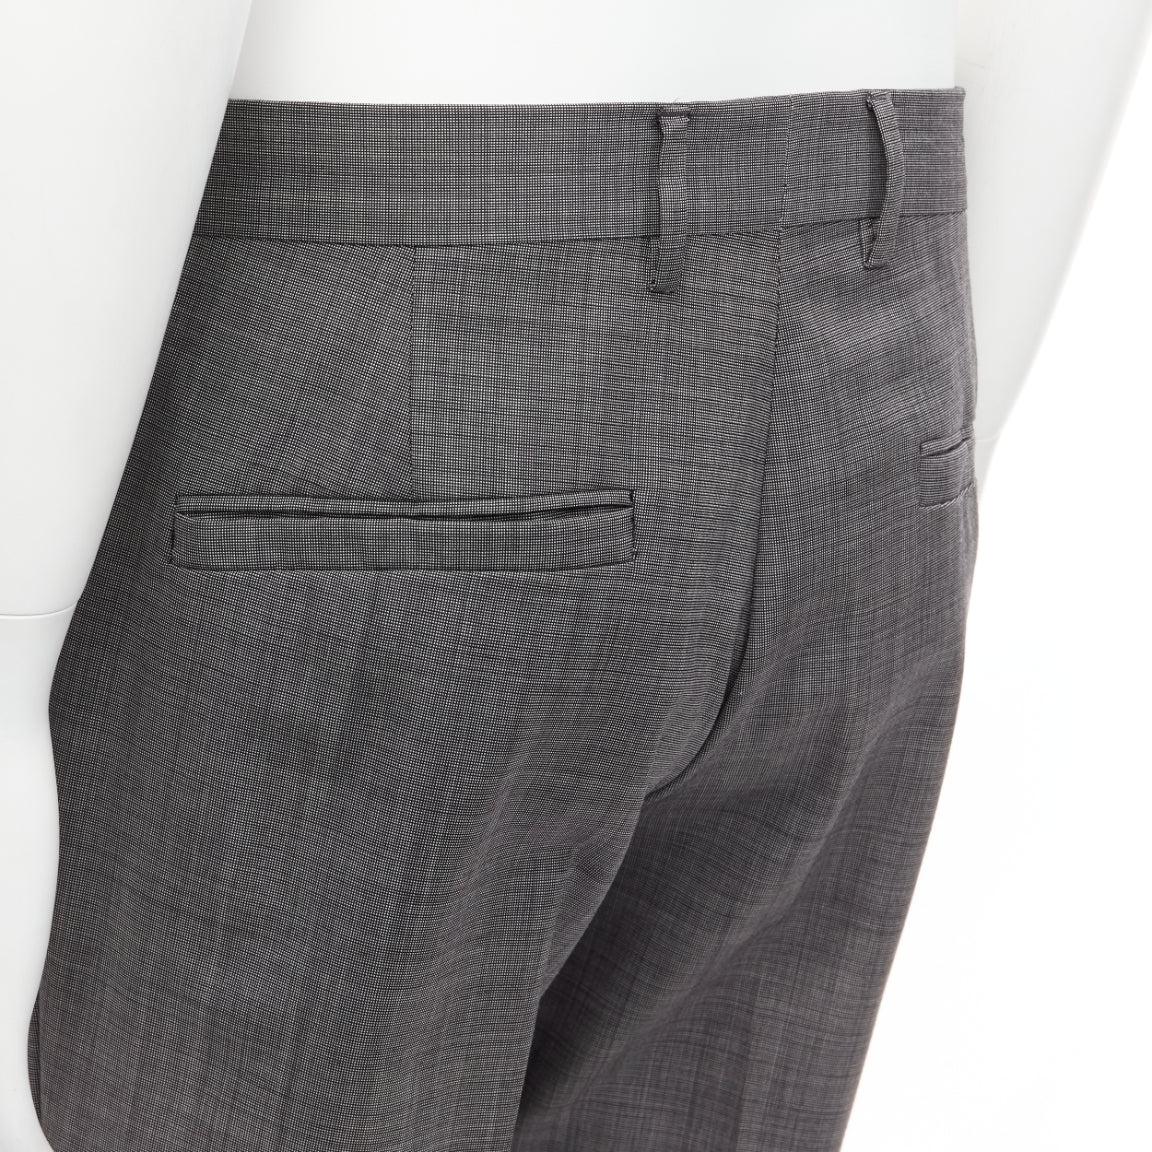 VERSACE 100% cotton grey checkered straight leg dress trousers IT48 M
Reference: CNLE/A00277
Brand: Versace
Designer: Donatella Versace
Material: Cotton
Color: Grey
Pattern: Checkered
Closure: Zip Fly
Made in: Italy

CONDITION:
Condition: Excellent,